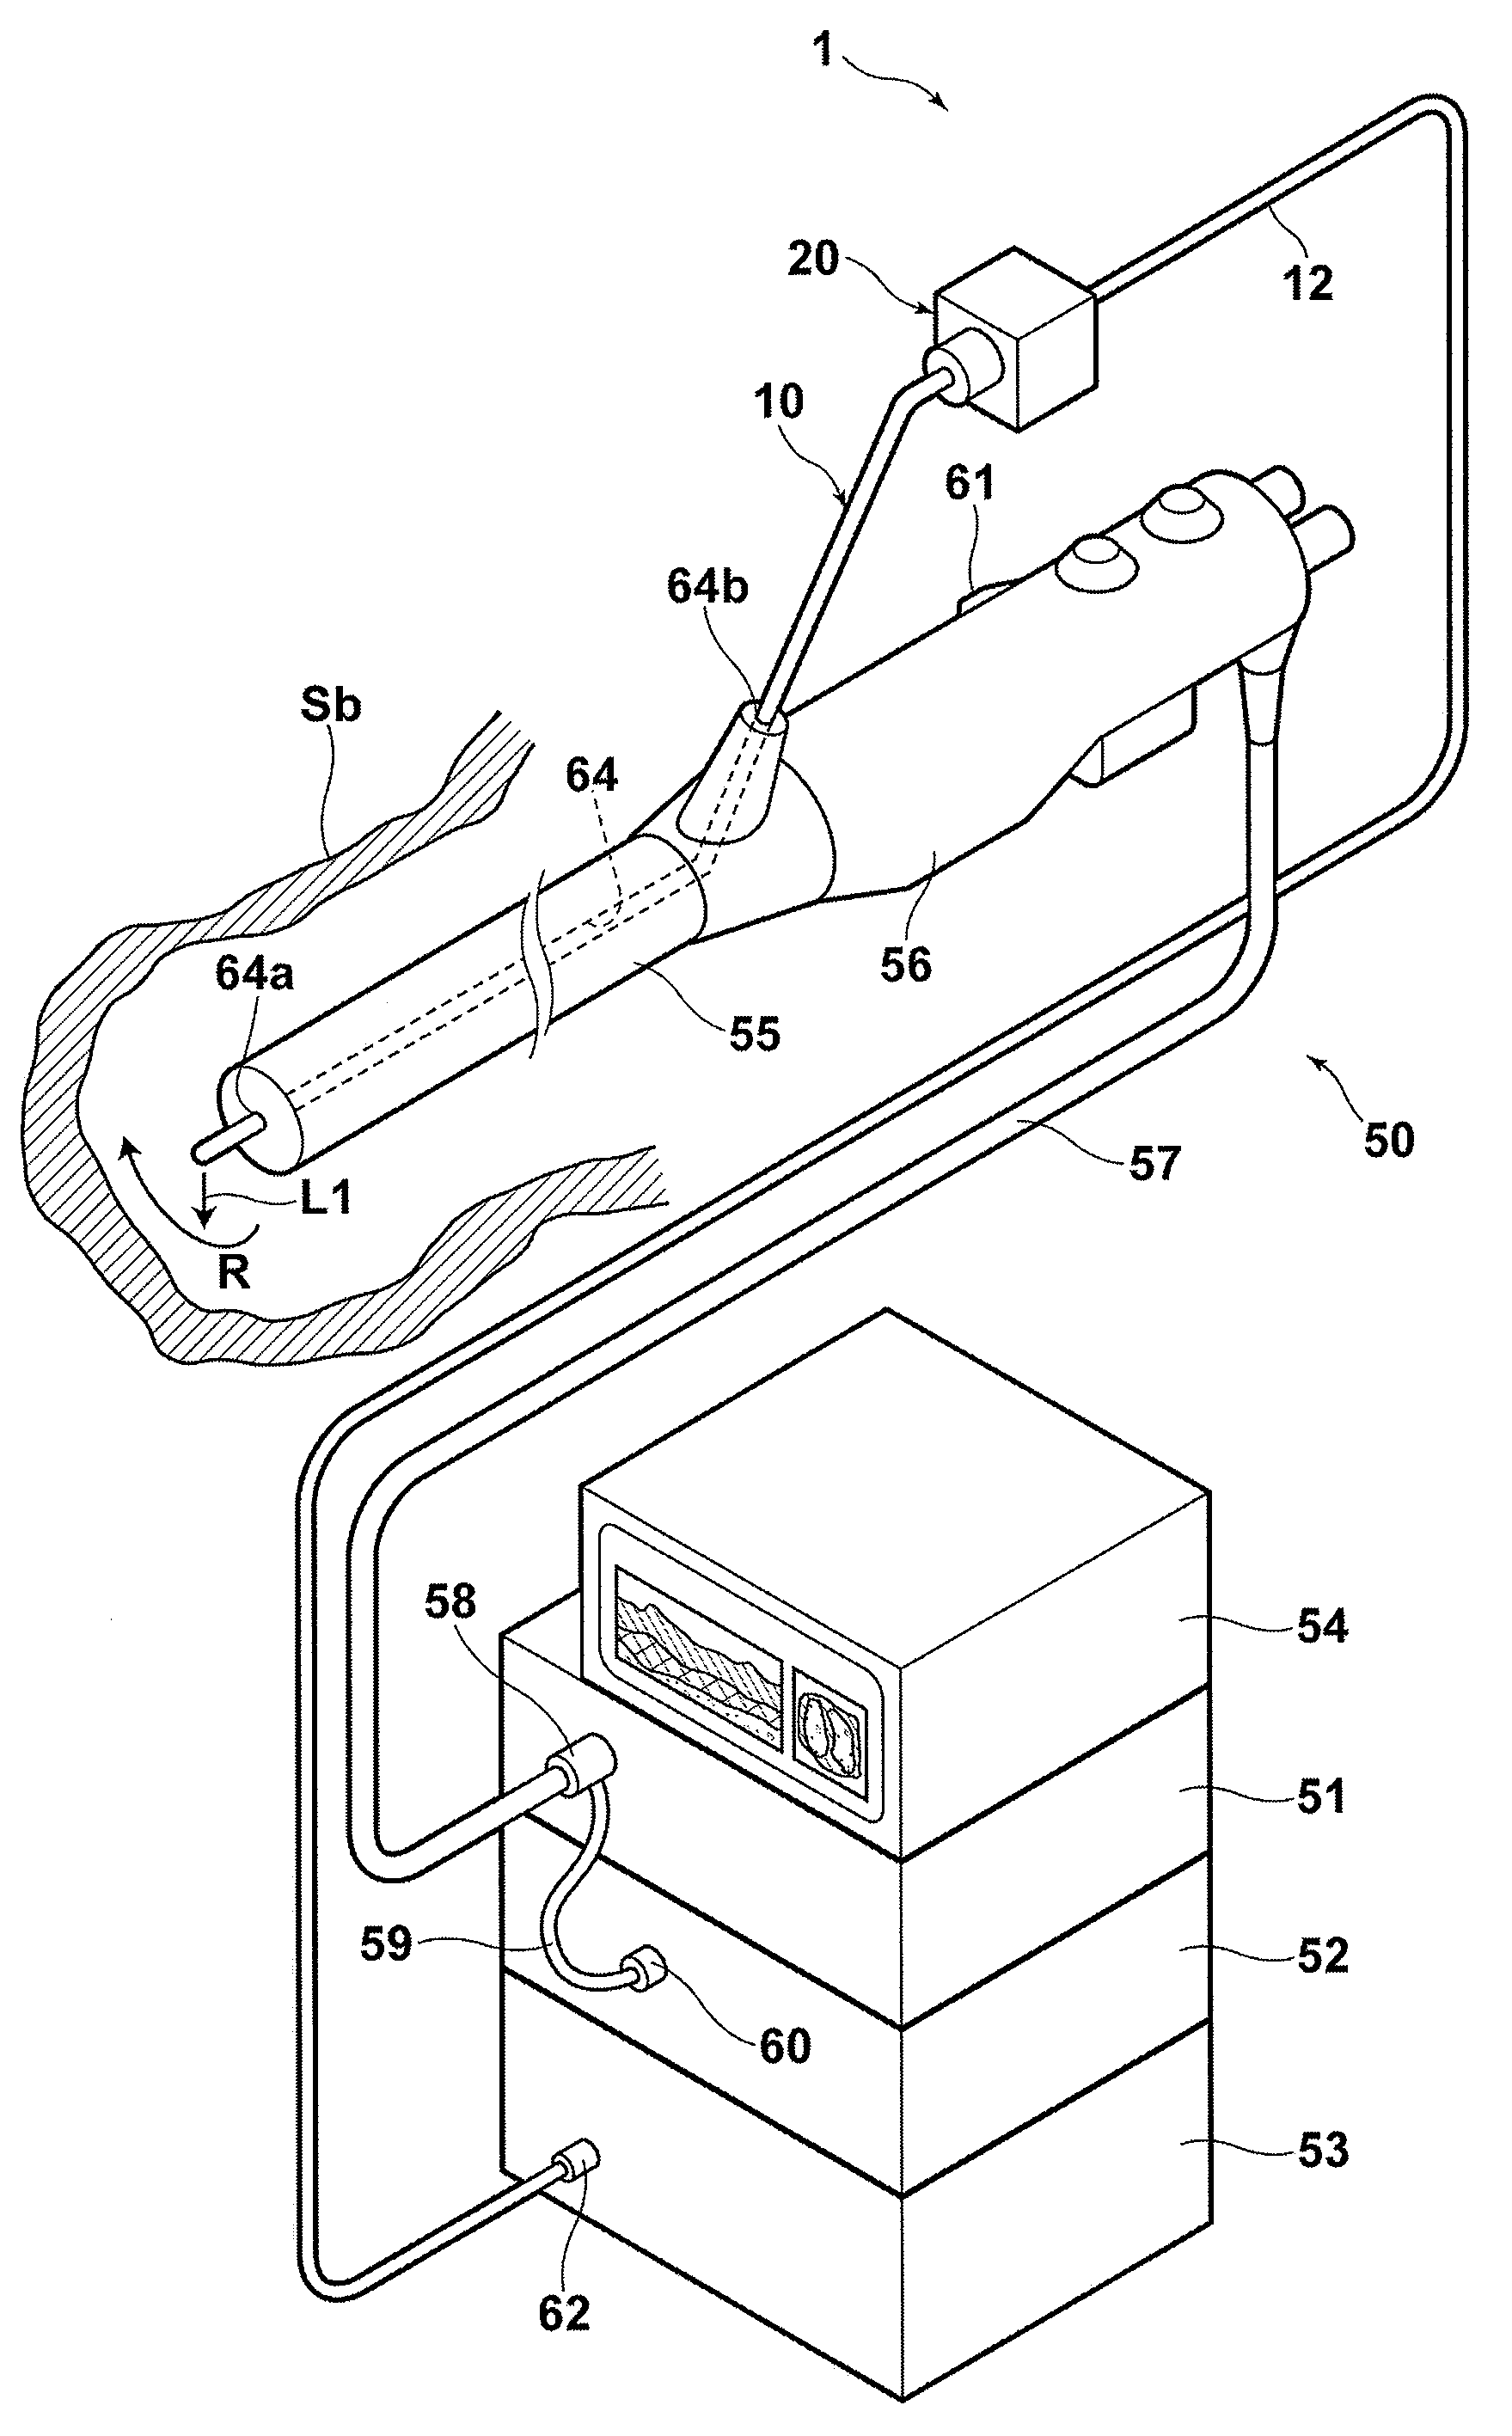 Oct optical probe and optical tomography imaging apparatus